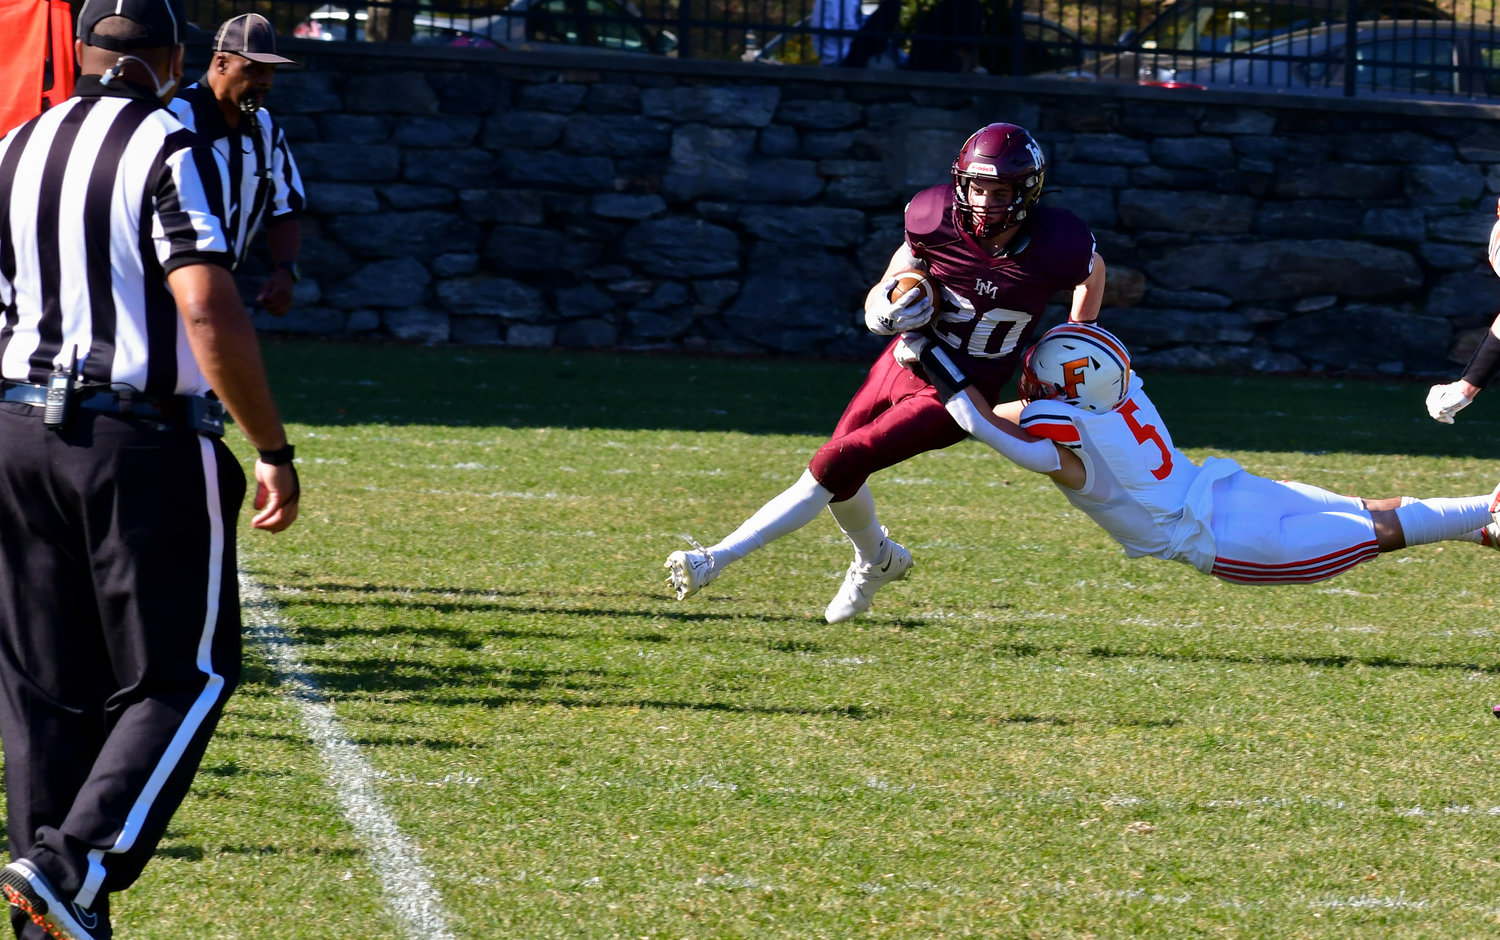 A Horace Mann running back tries to evade a Fieldston player during the Lions' blowout win over the Eagles.